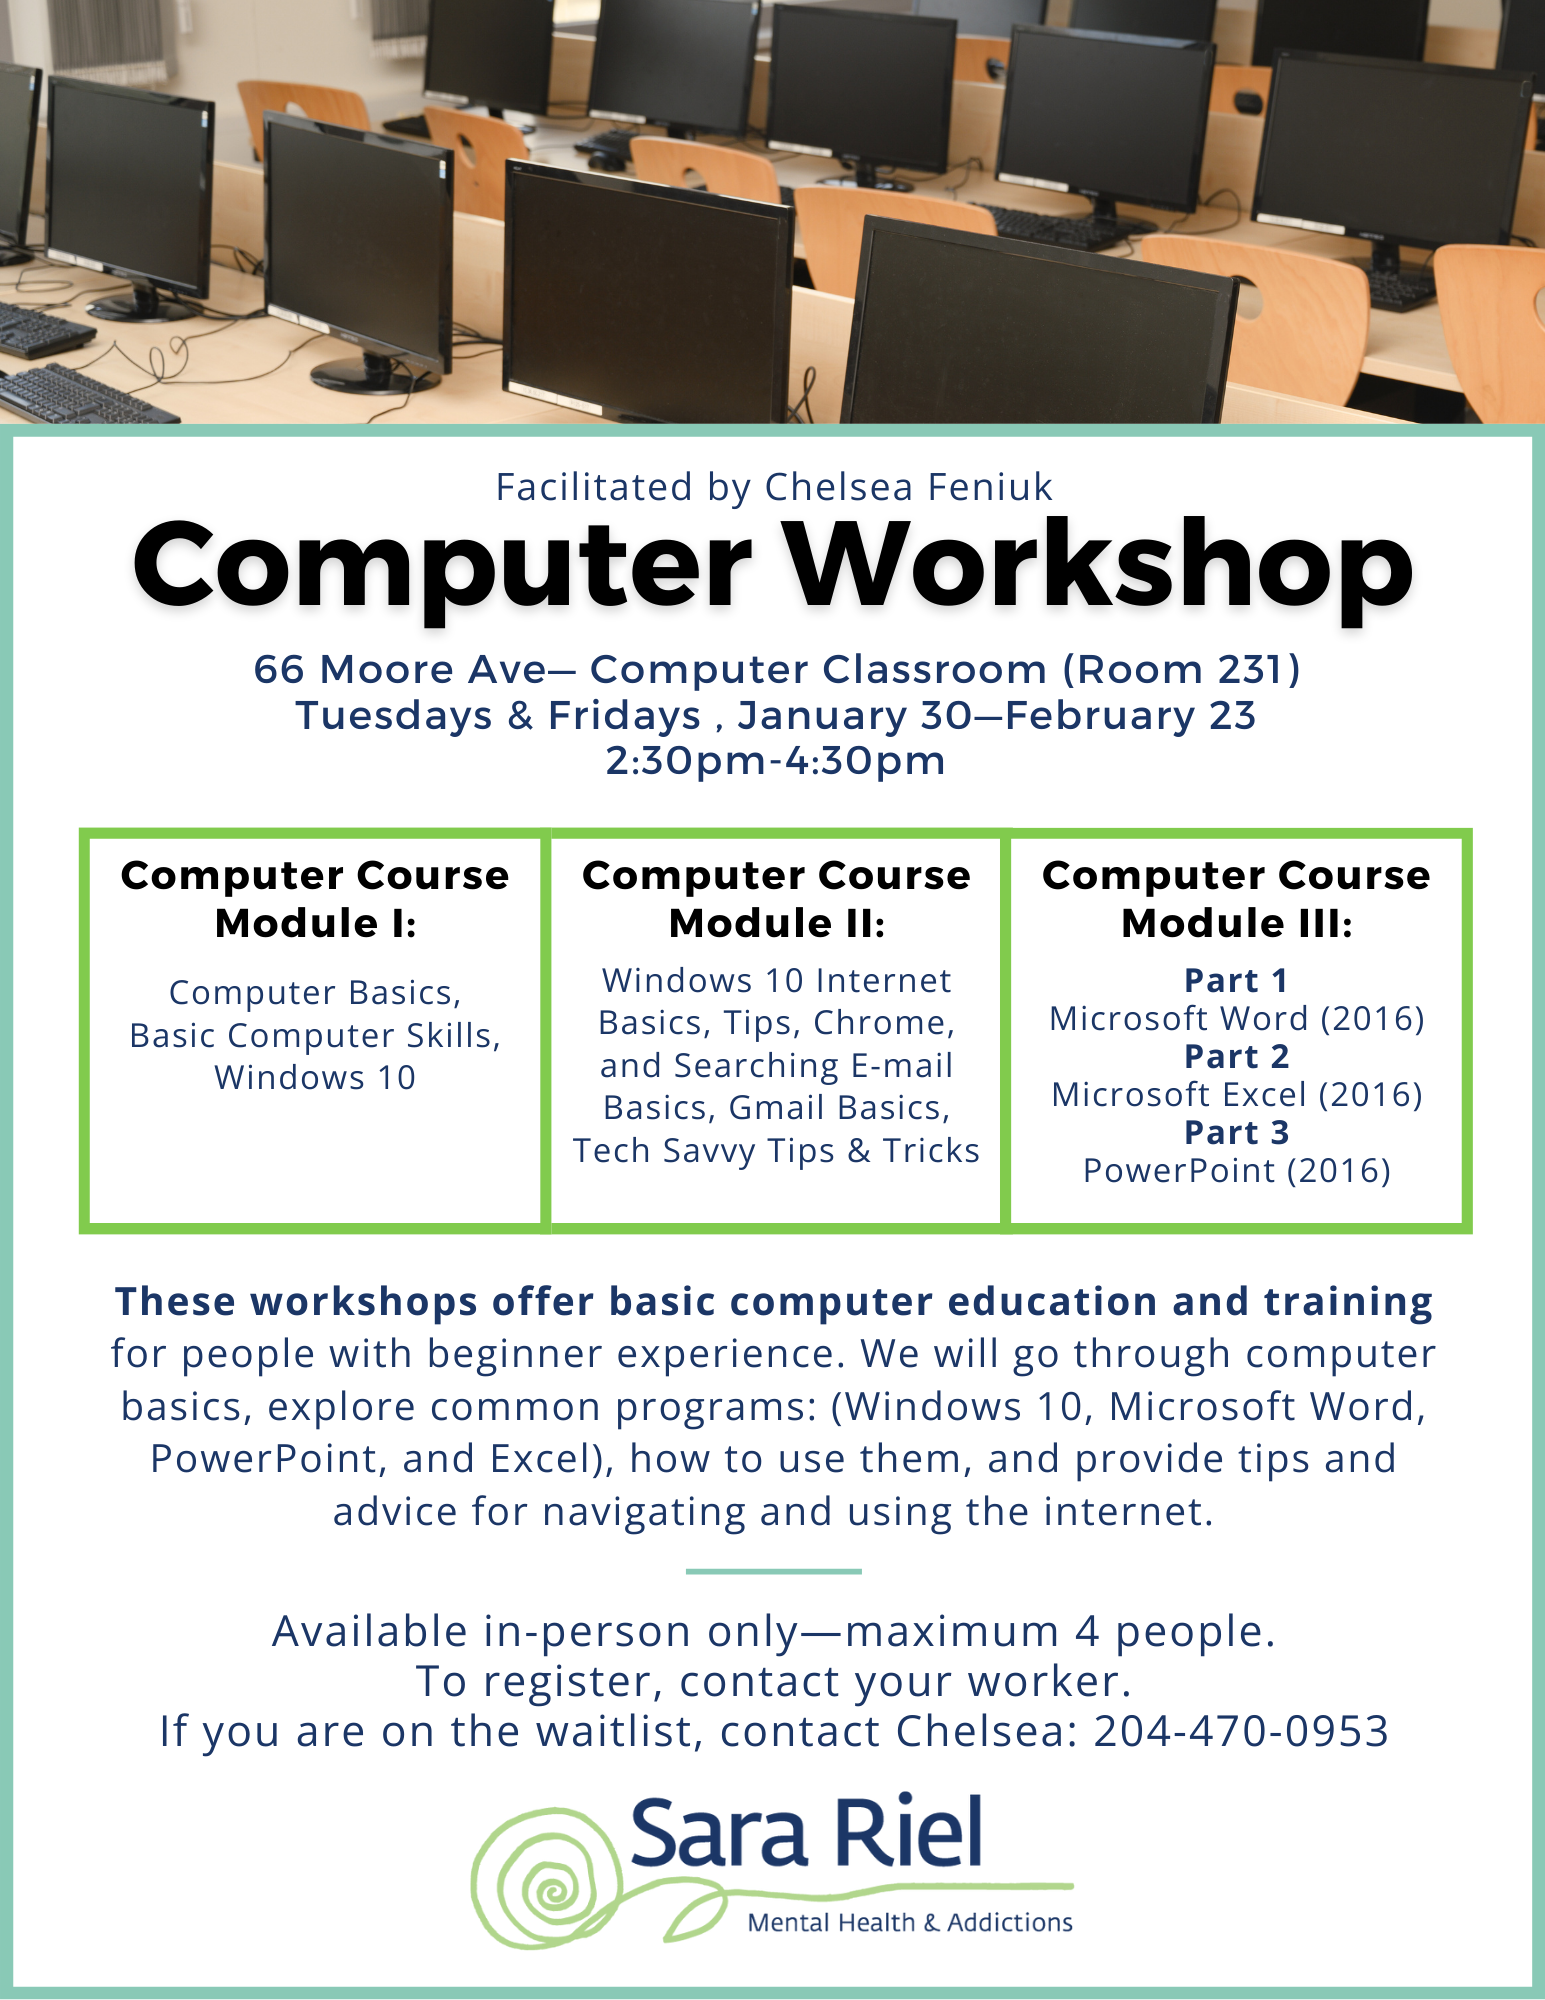 Image contains details about the Computer Workshop.